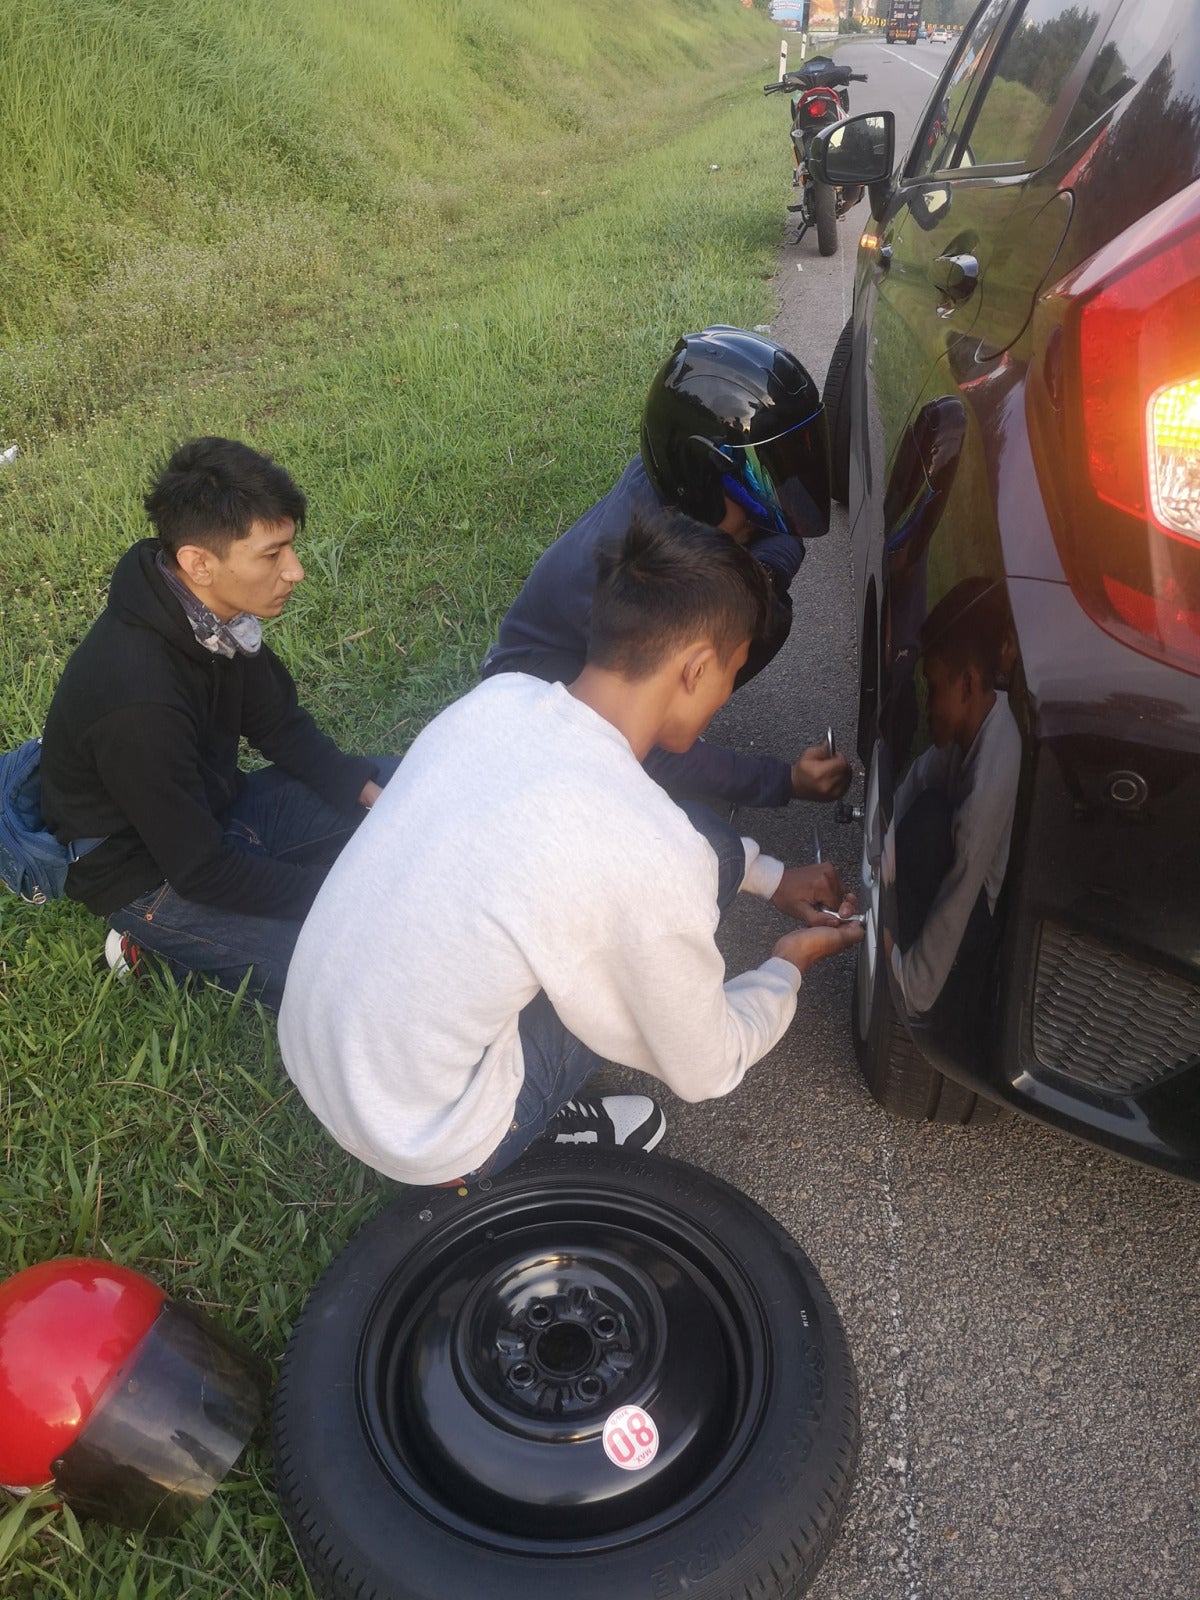 3 kind strangers help woman to change tyre punctured